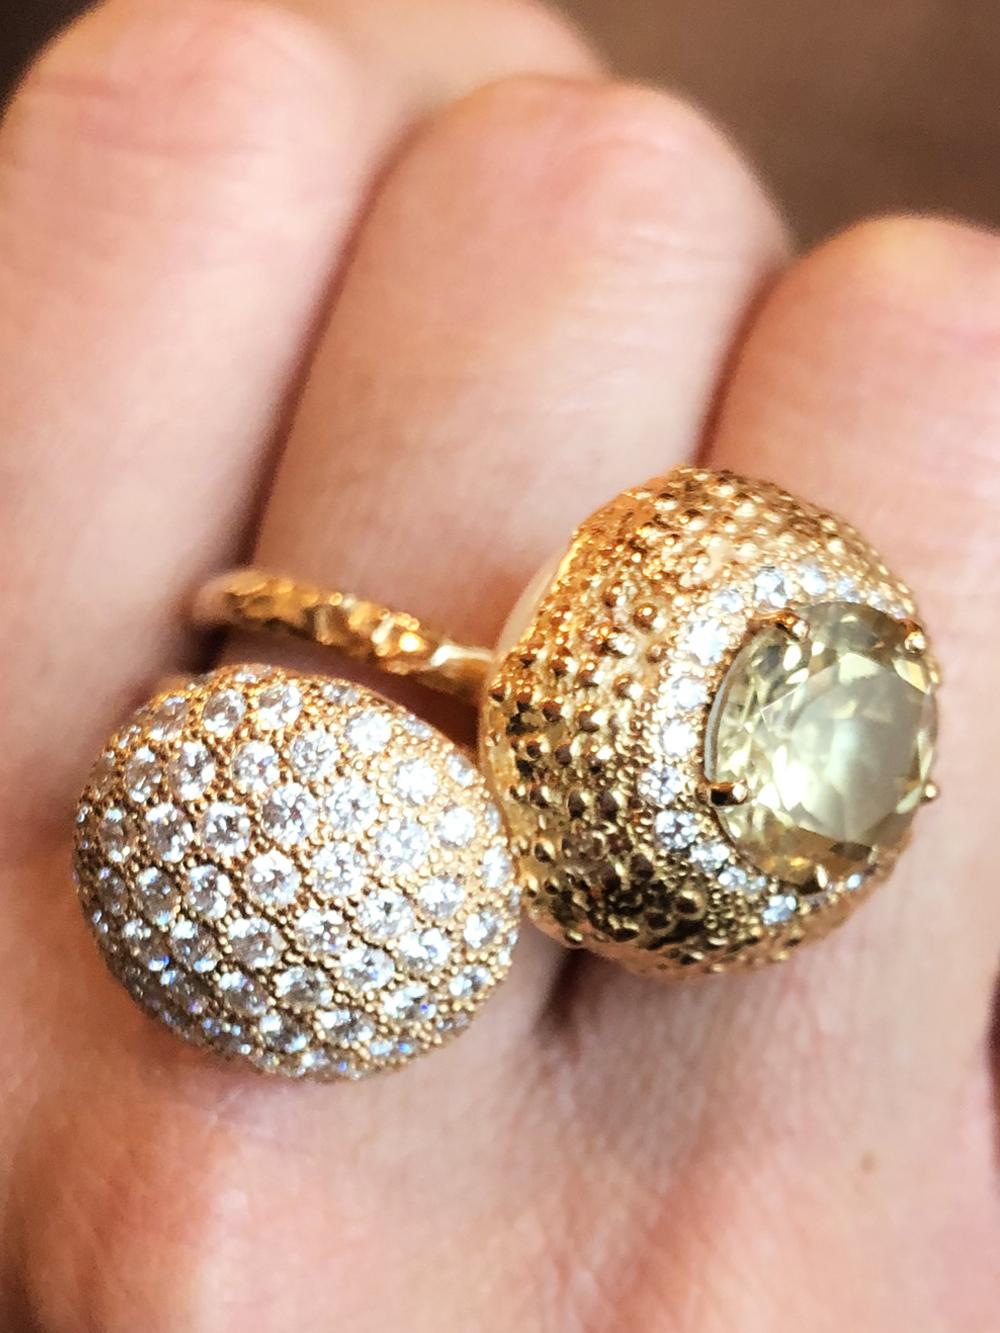 Bubbling head Ring in 18 karat Rose Gold gr. 10,50; the inspiration of the design comes from molding a sea urching into gold, with a Citrine center stone Carat 3,14 surrounded by white Diamond pavè Carat gr 0,28; underneath the rose gold sea urchin